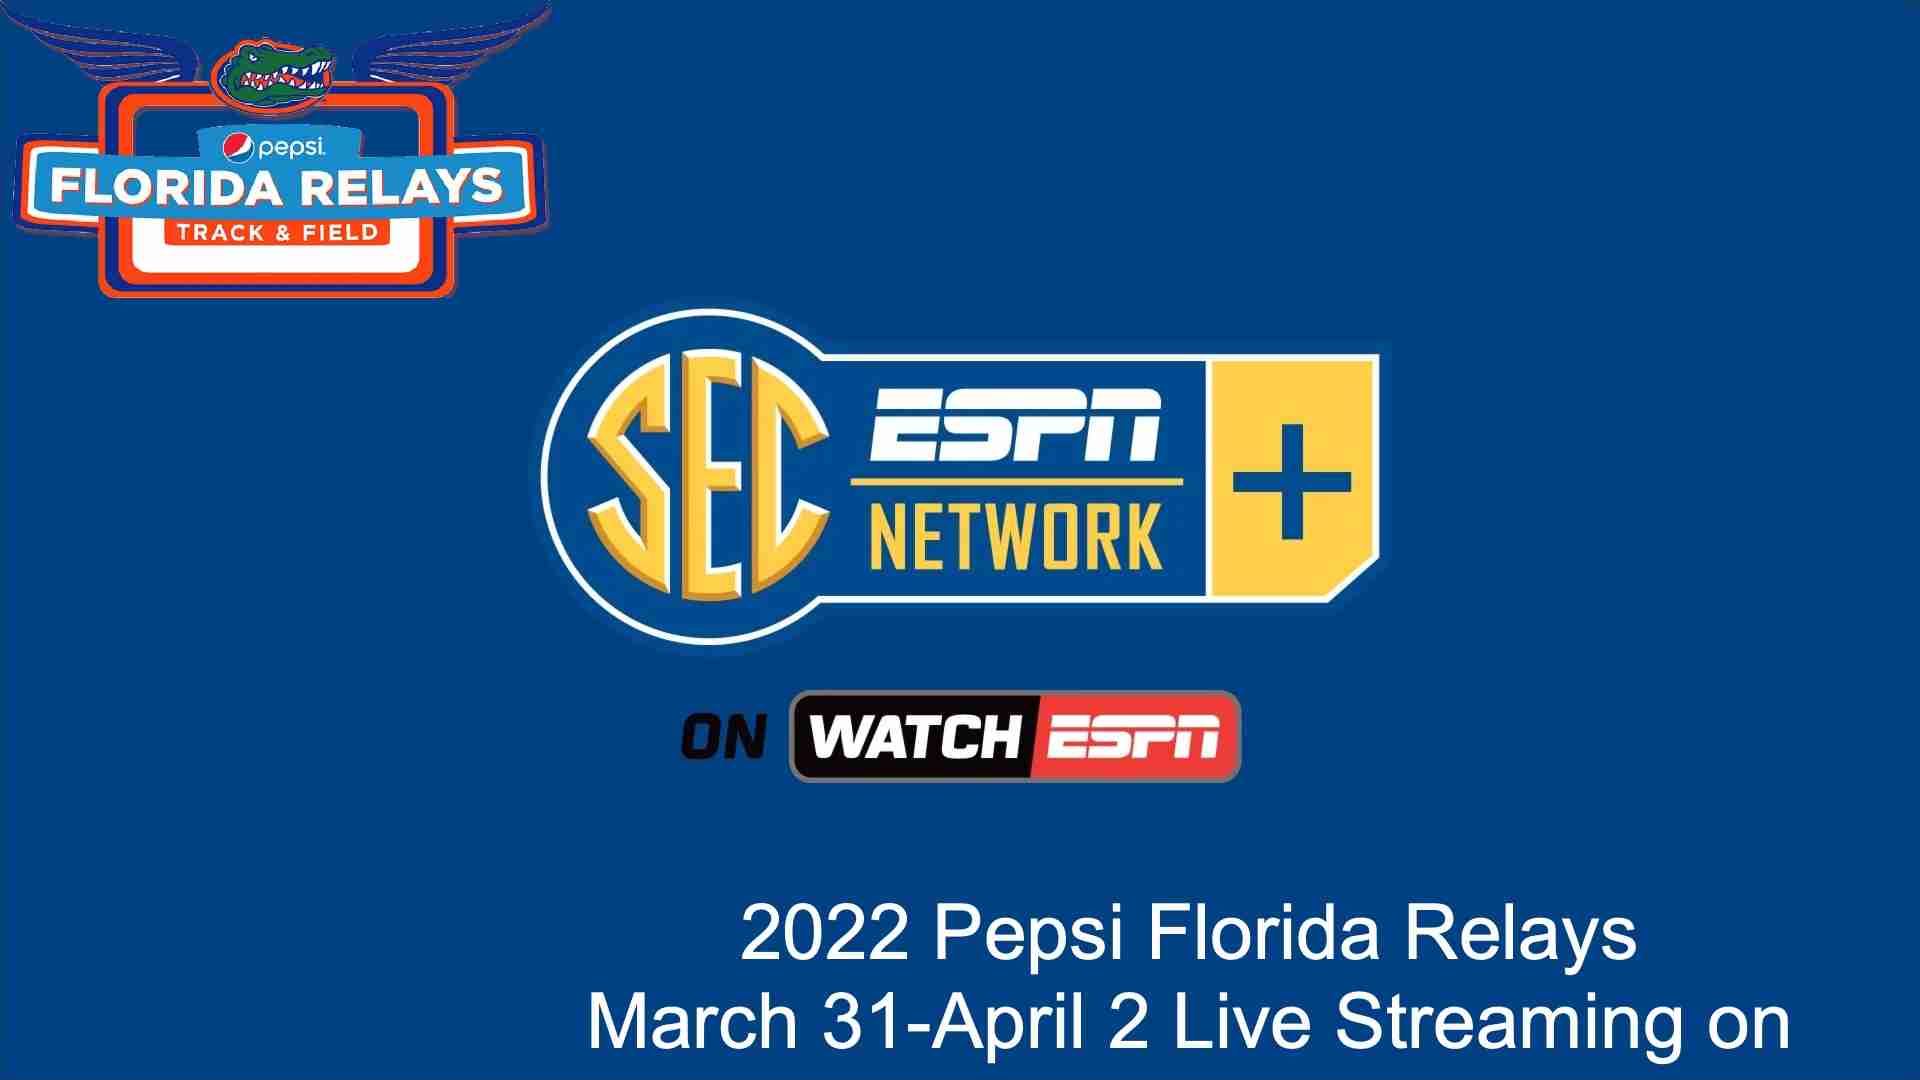 How to watch the Pepsi Florida Relays 2022?